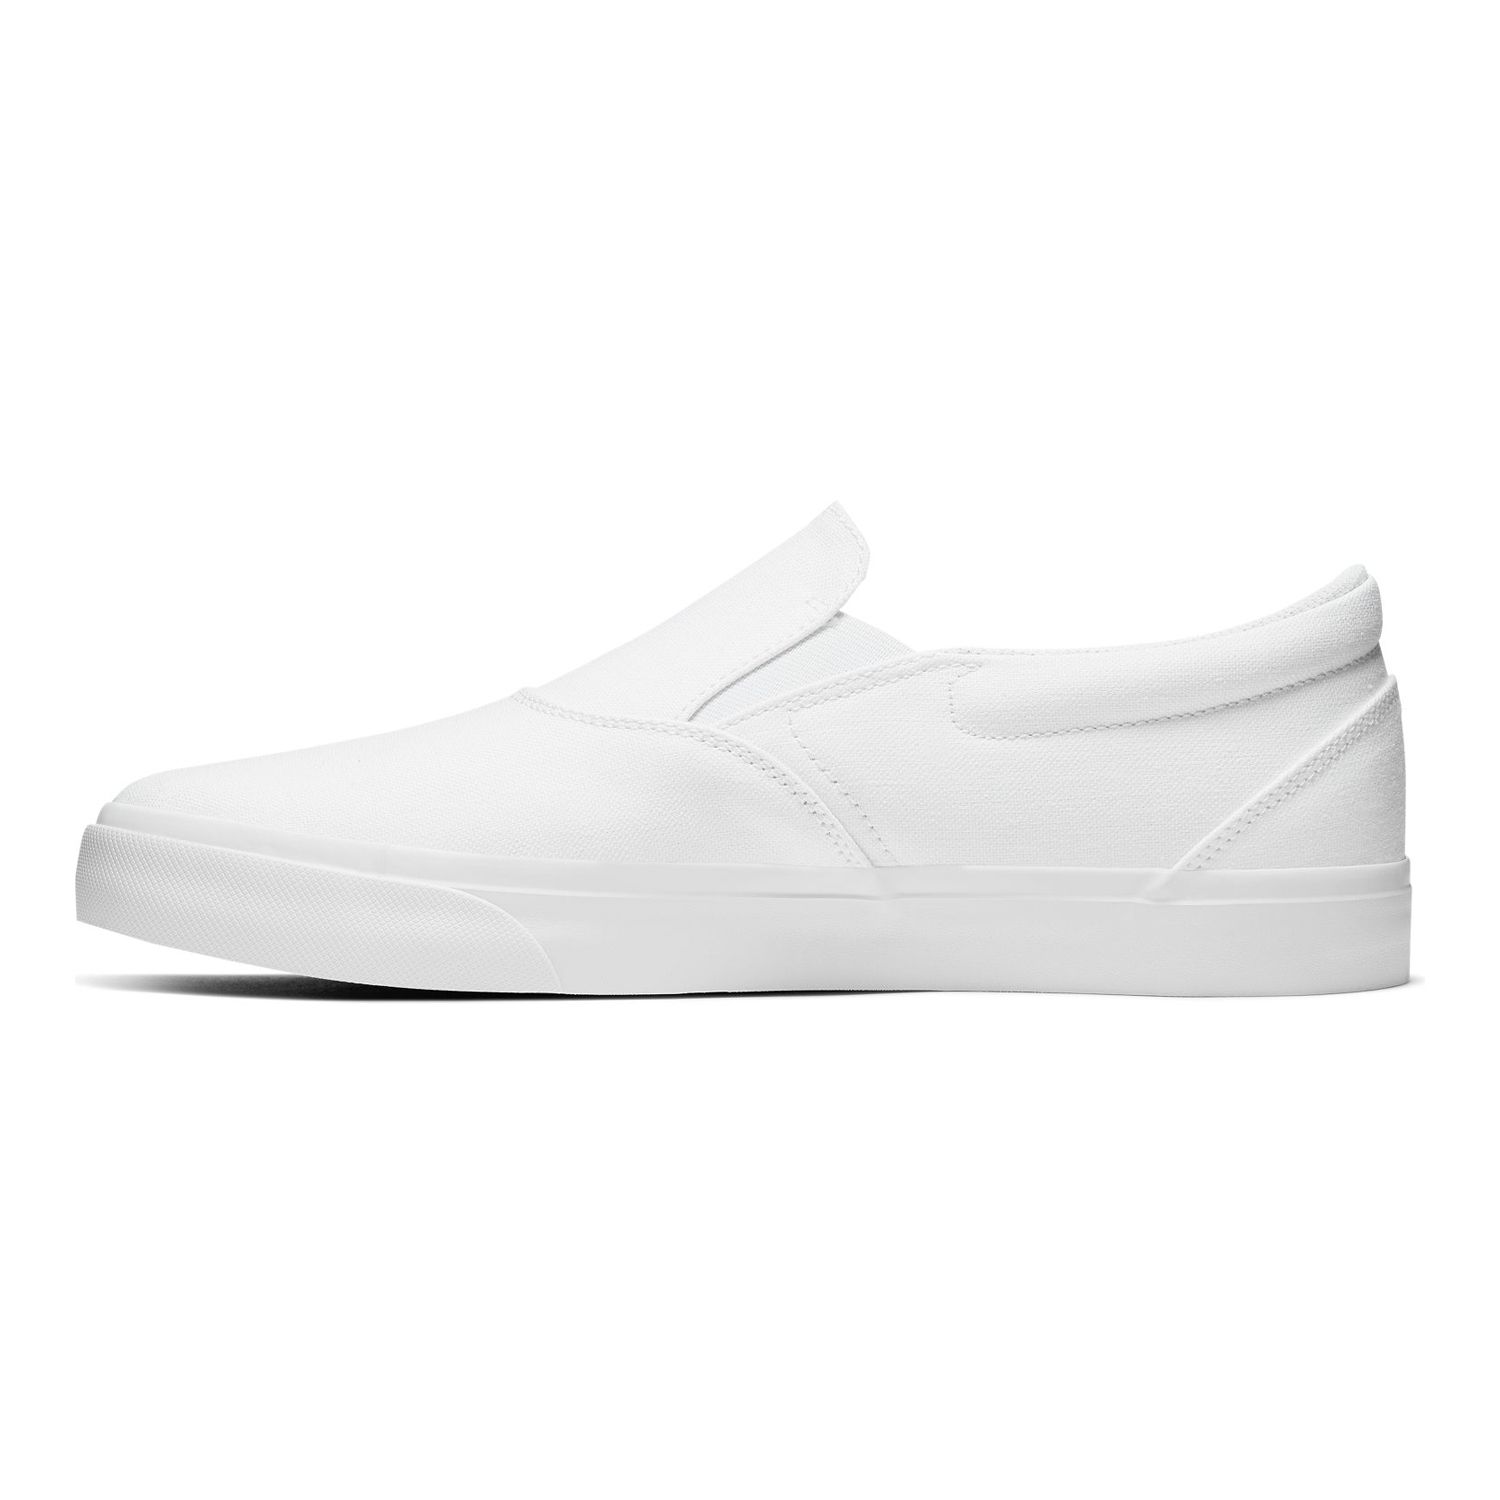 nike air slip on shoes